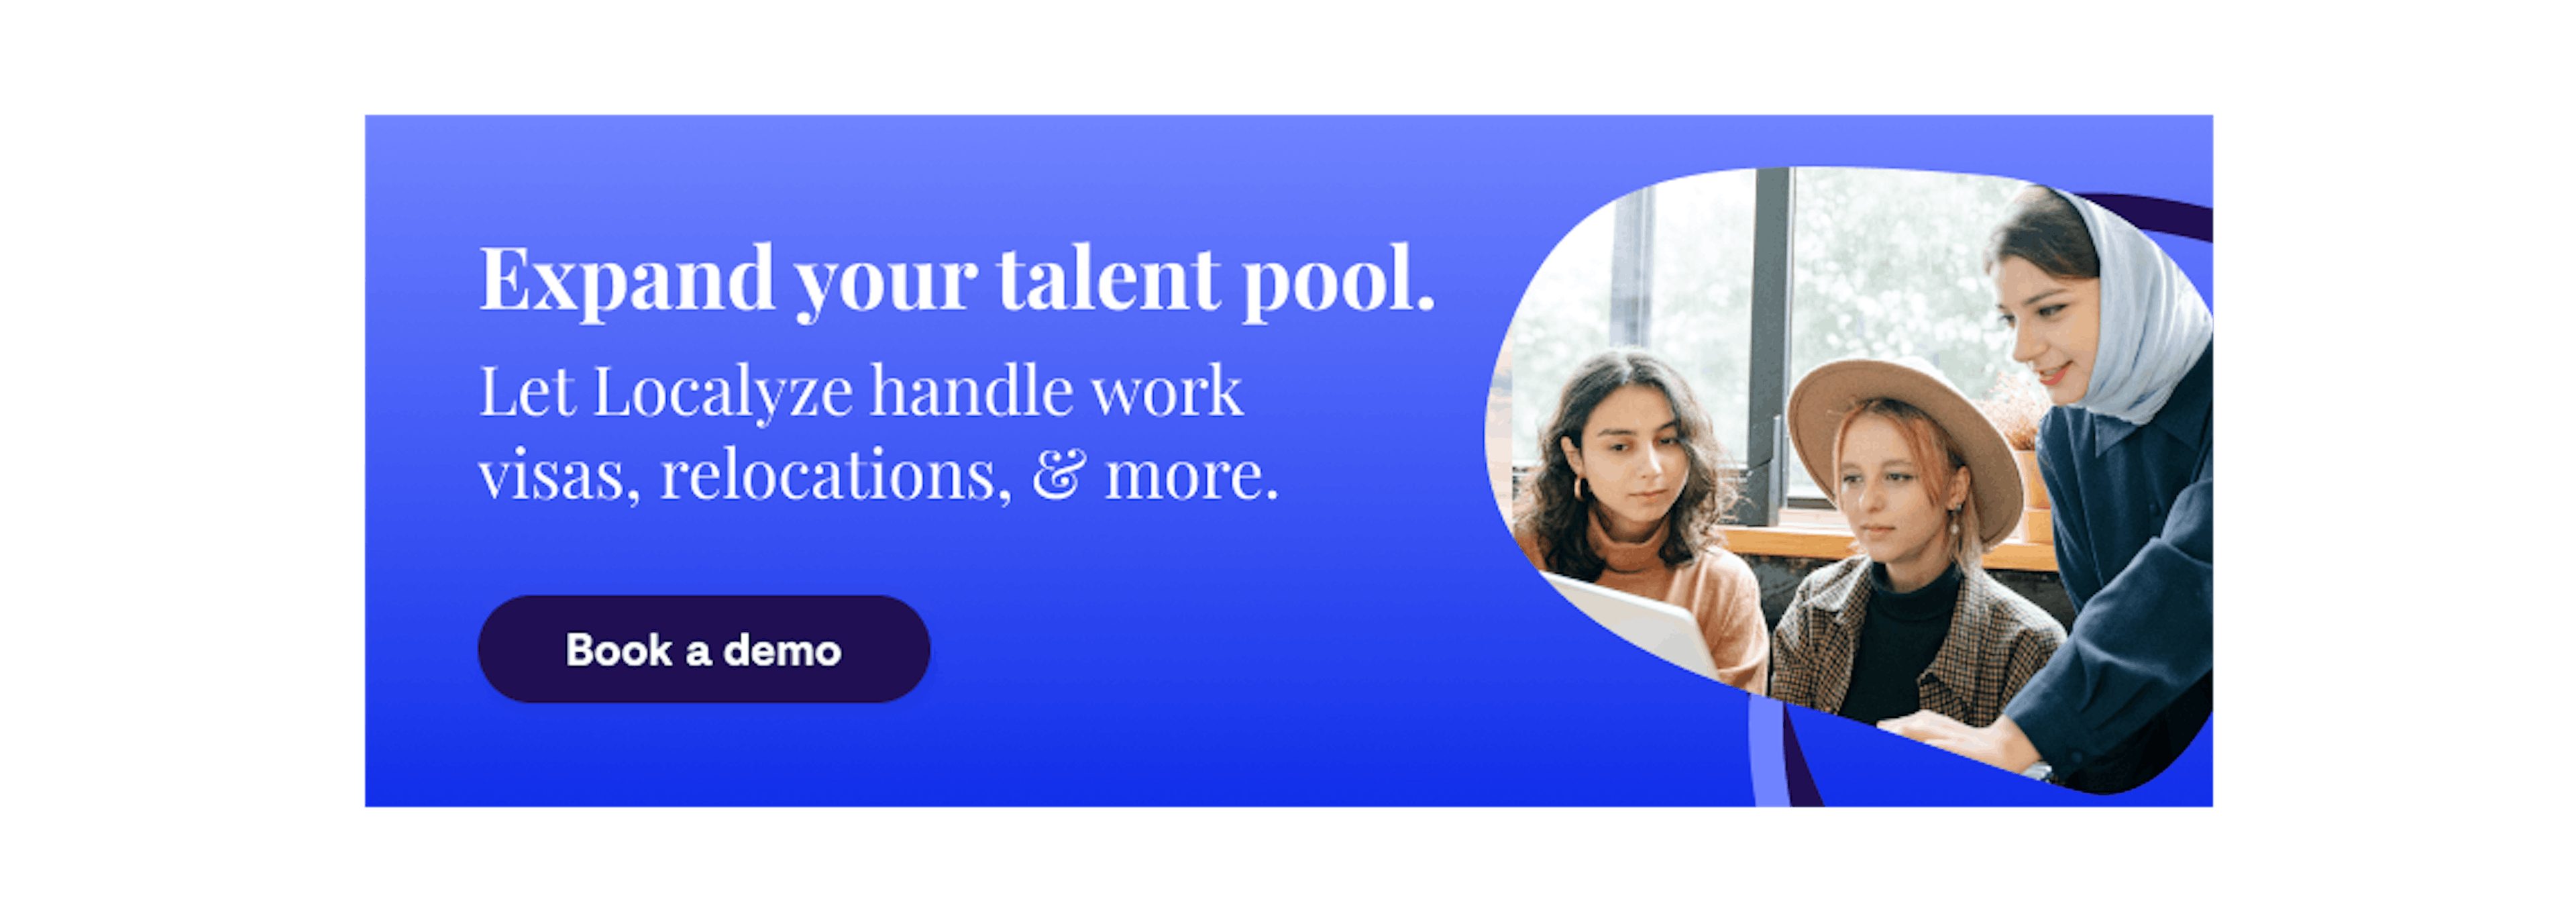 International recruiting with Localyze: work visas, relocations, and more